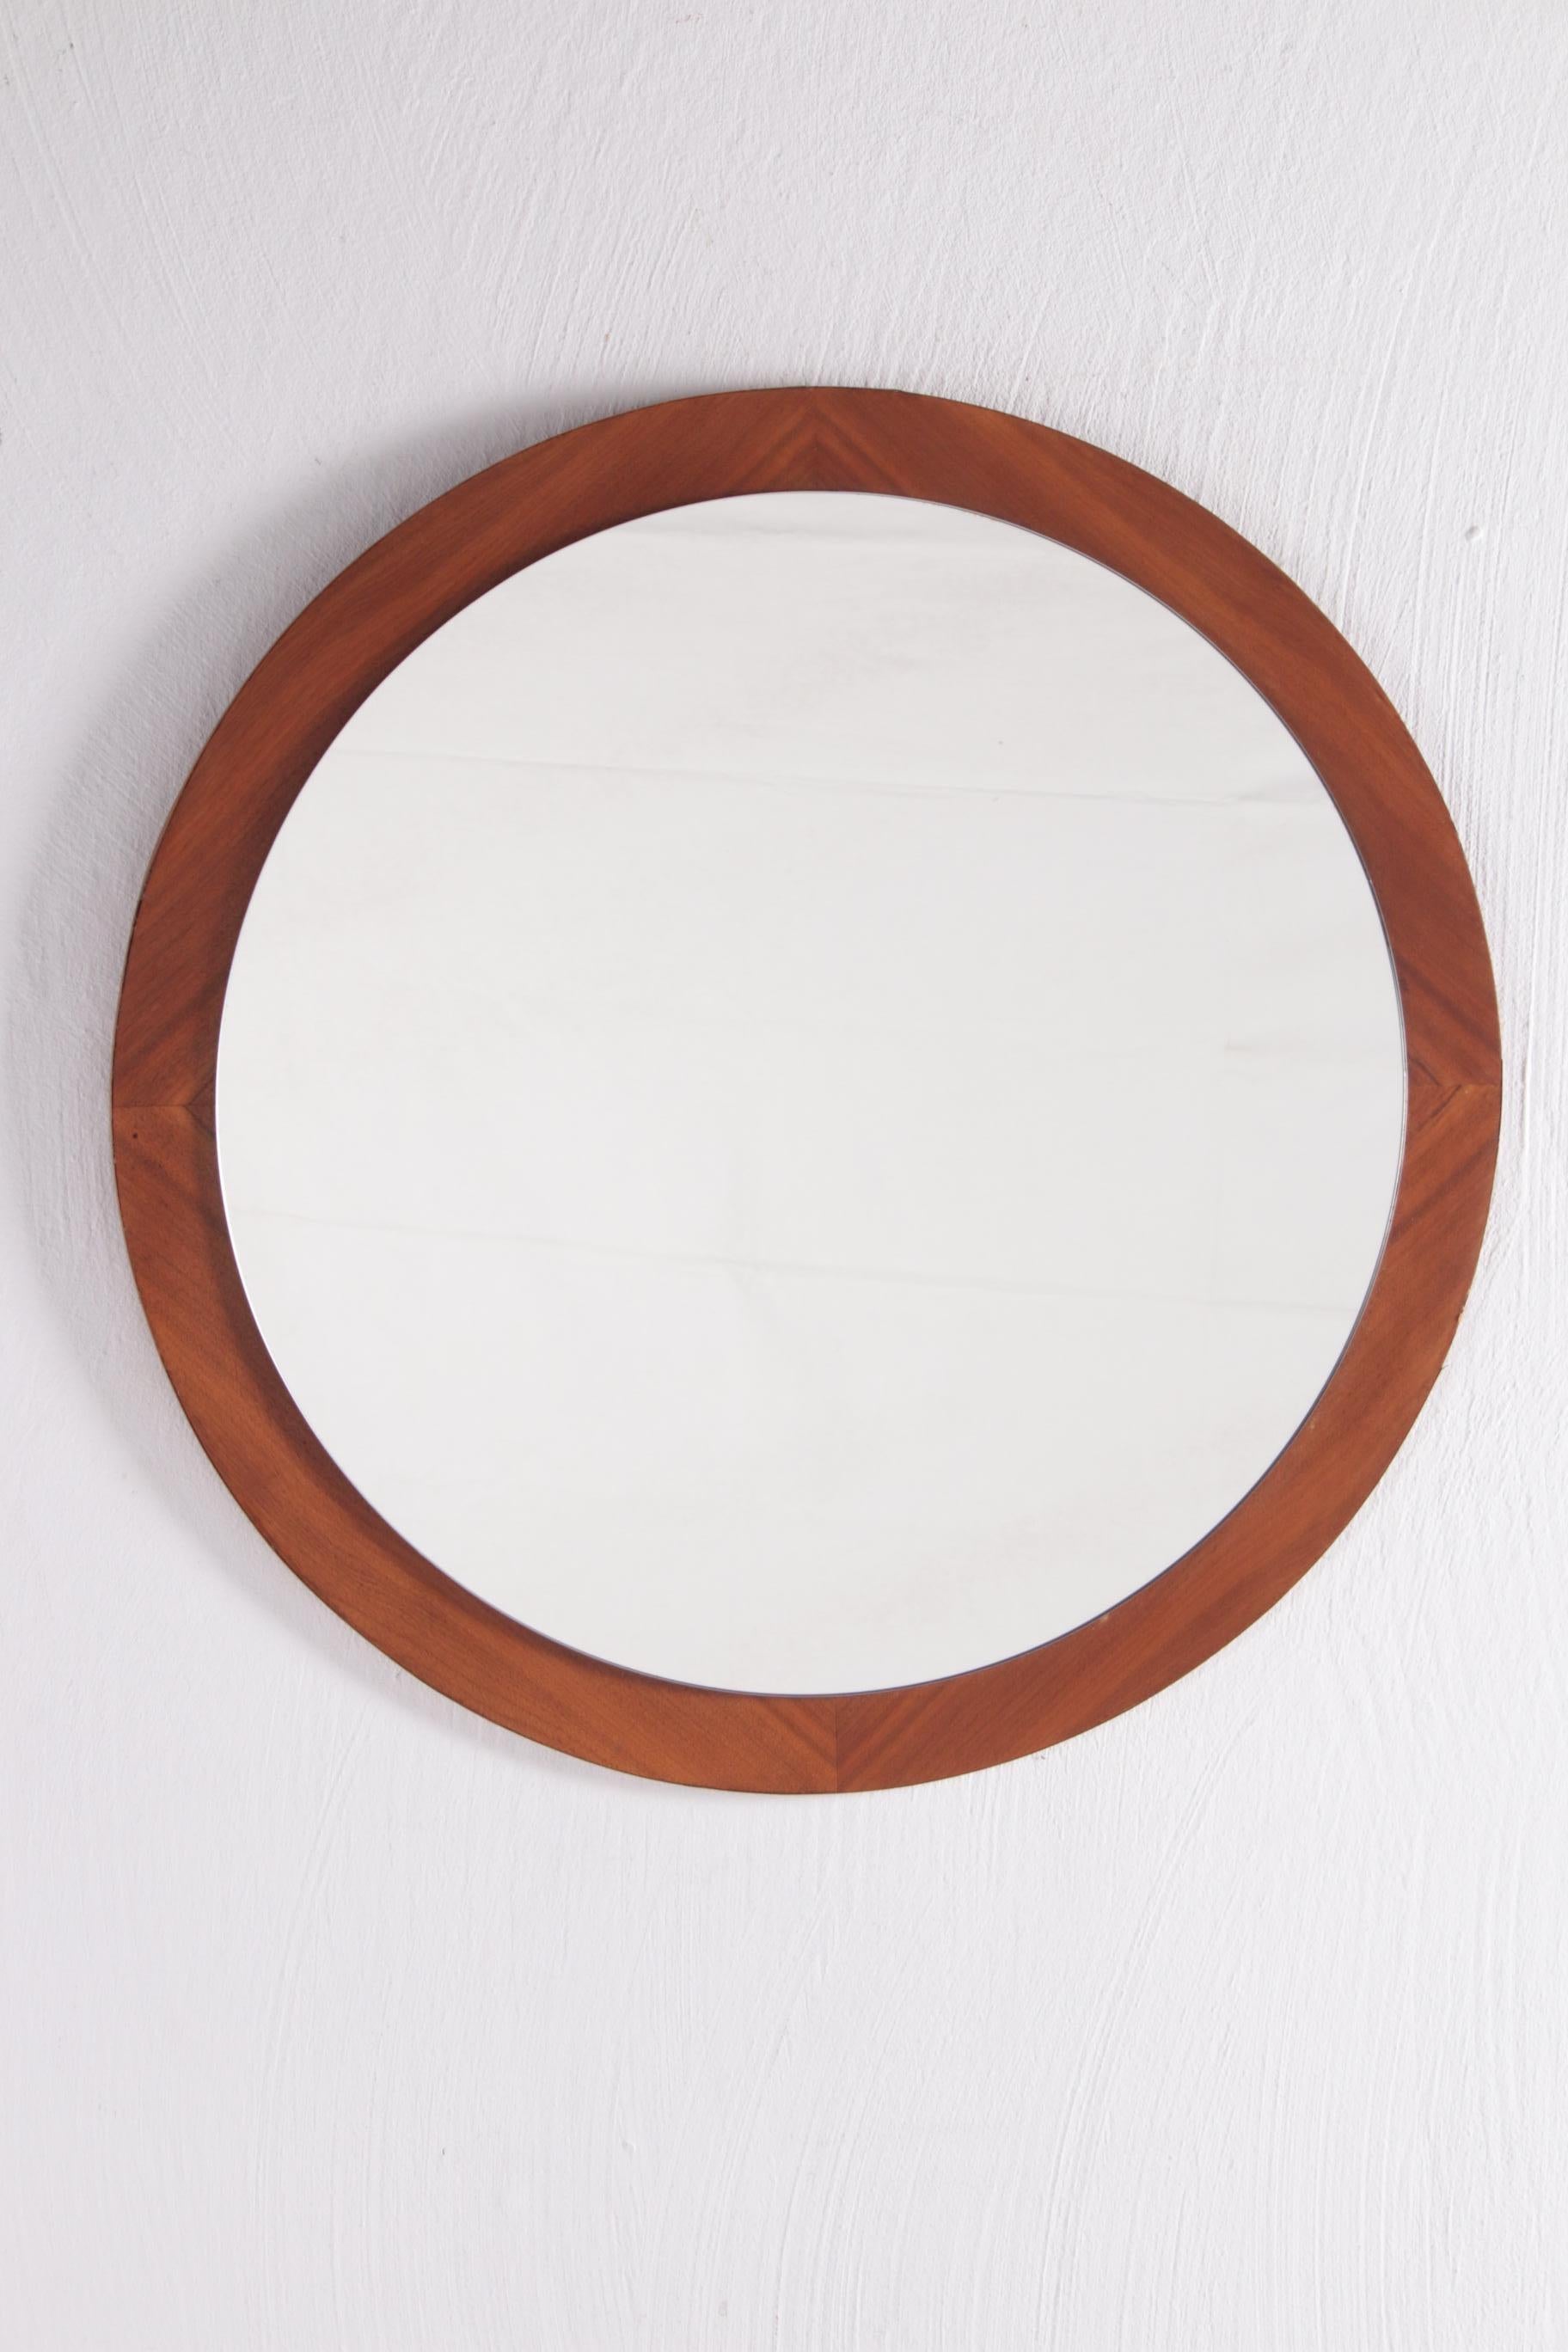 Vintage teak round wall mirror, 1960s


Beautiful teak wooden round mirror made in Denmark around the 1960s.

The mirror is fixed on a round teak surface.

The simple mirror fits perfectly into any interior.